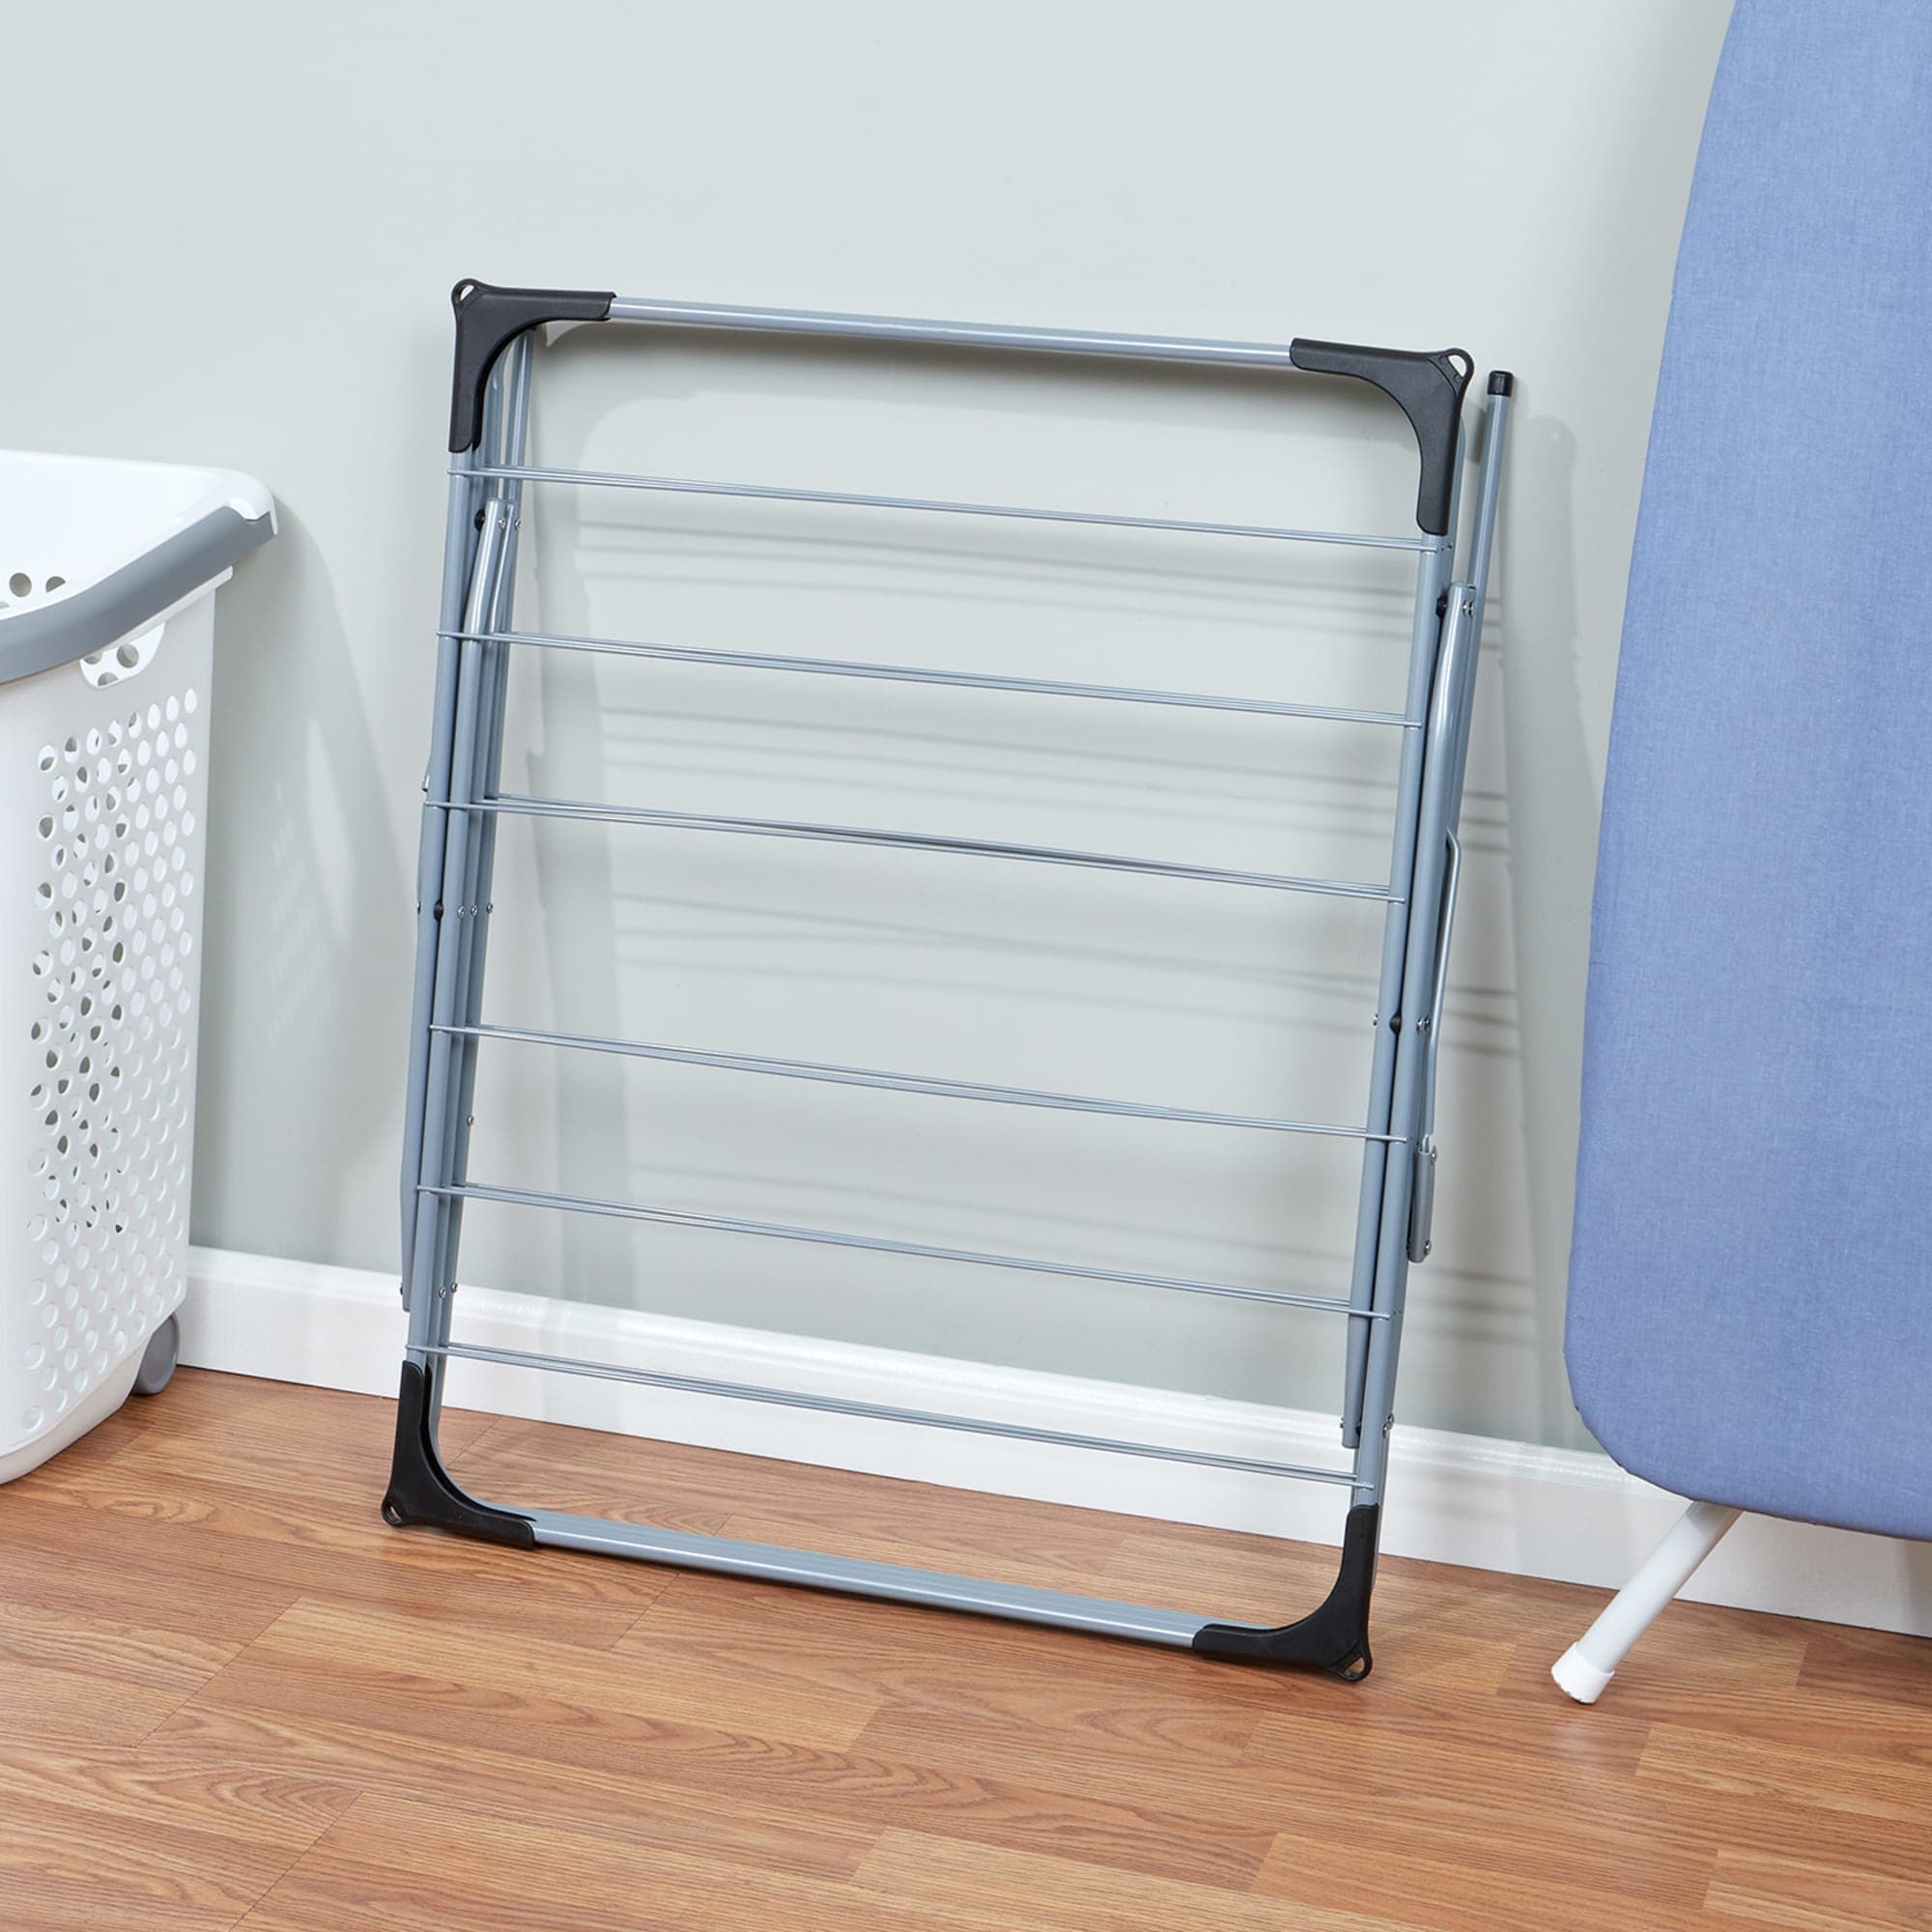 Home Basics 3-Tier Clothes Dryer $15.00 EACH, CASE PACK OF 4